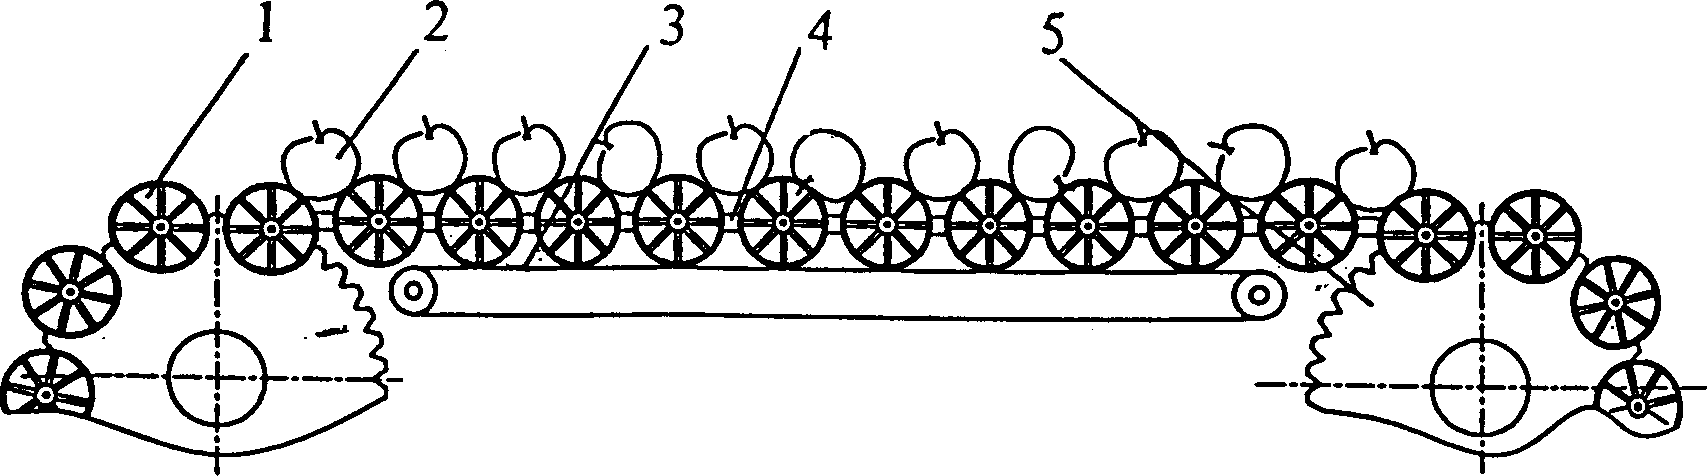 Equipment capable of implementing automatic single-line conveyance of quasi-spherical fruits and uniformly turning them